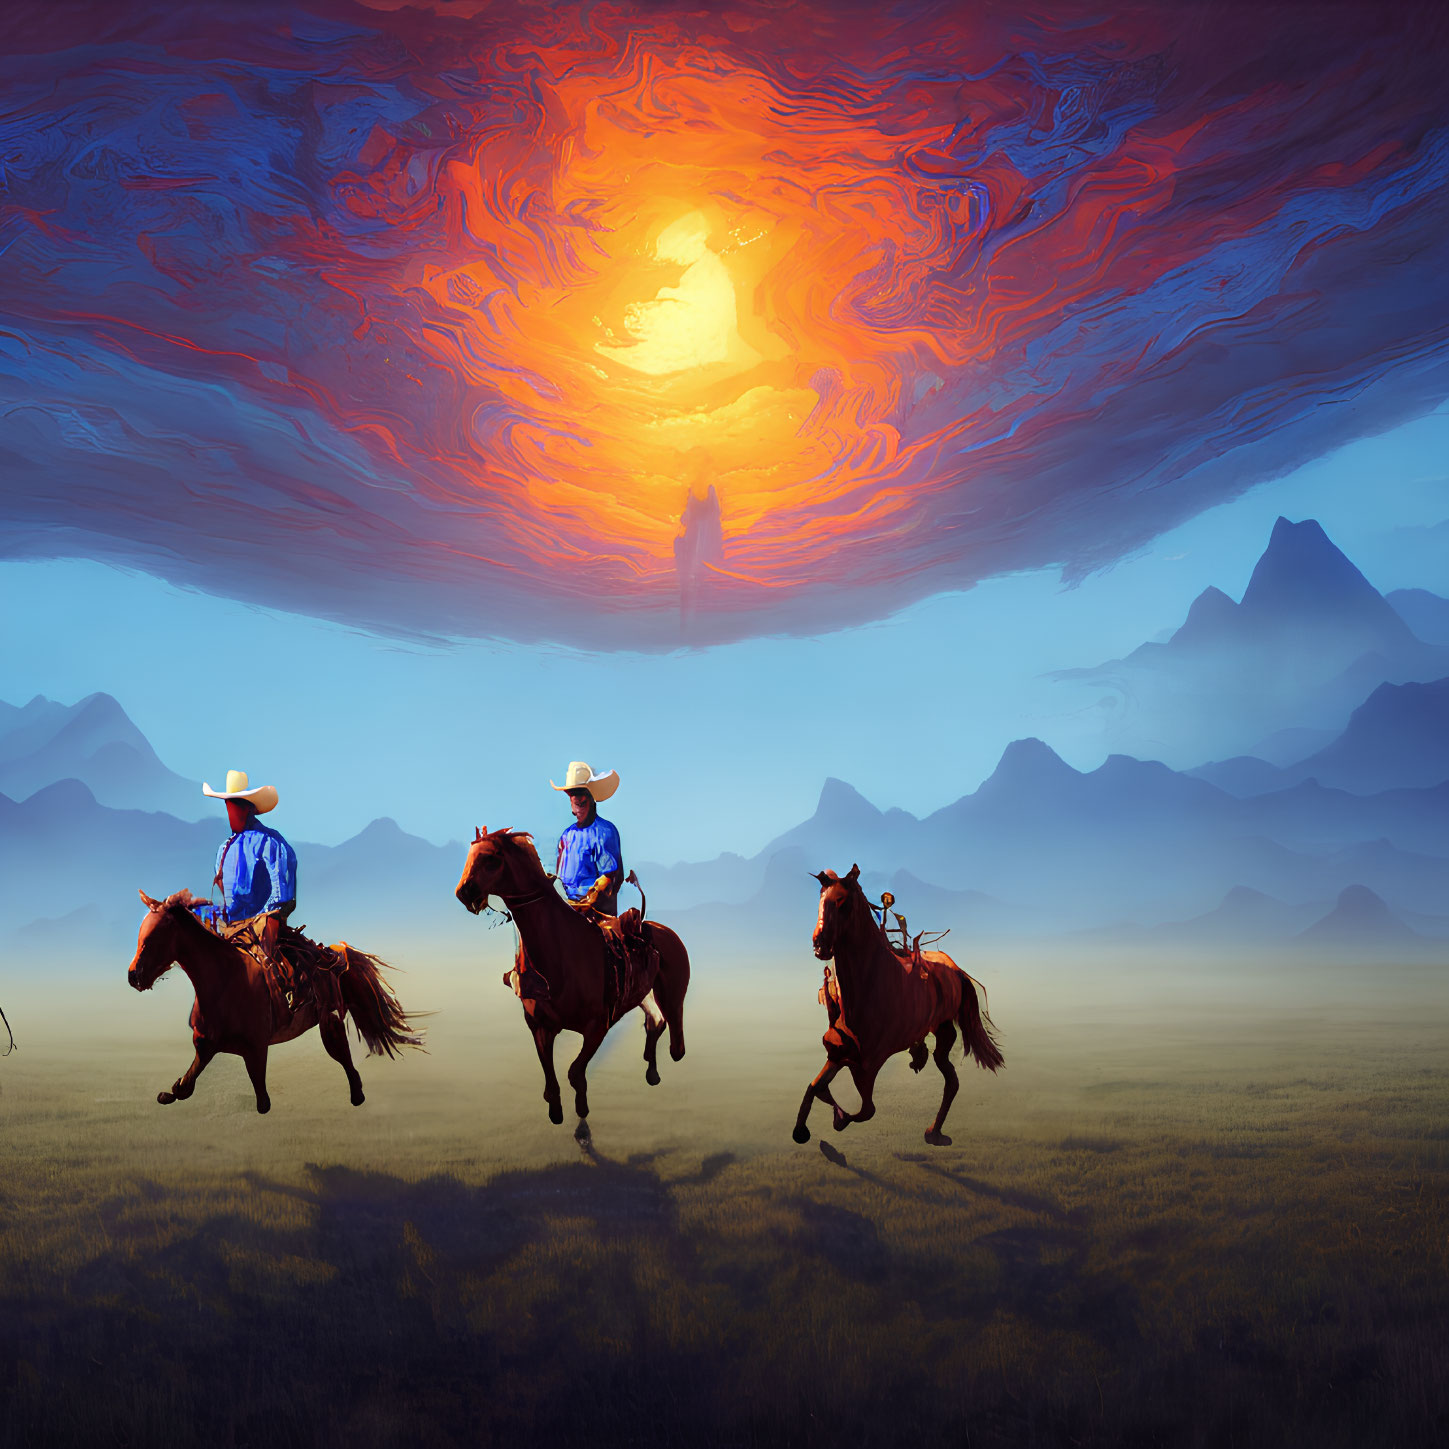 Cowboys riding horses under surreal red and orange sky